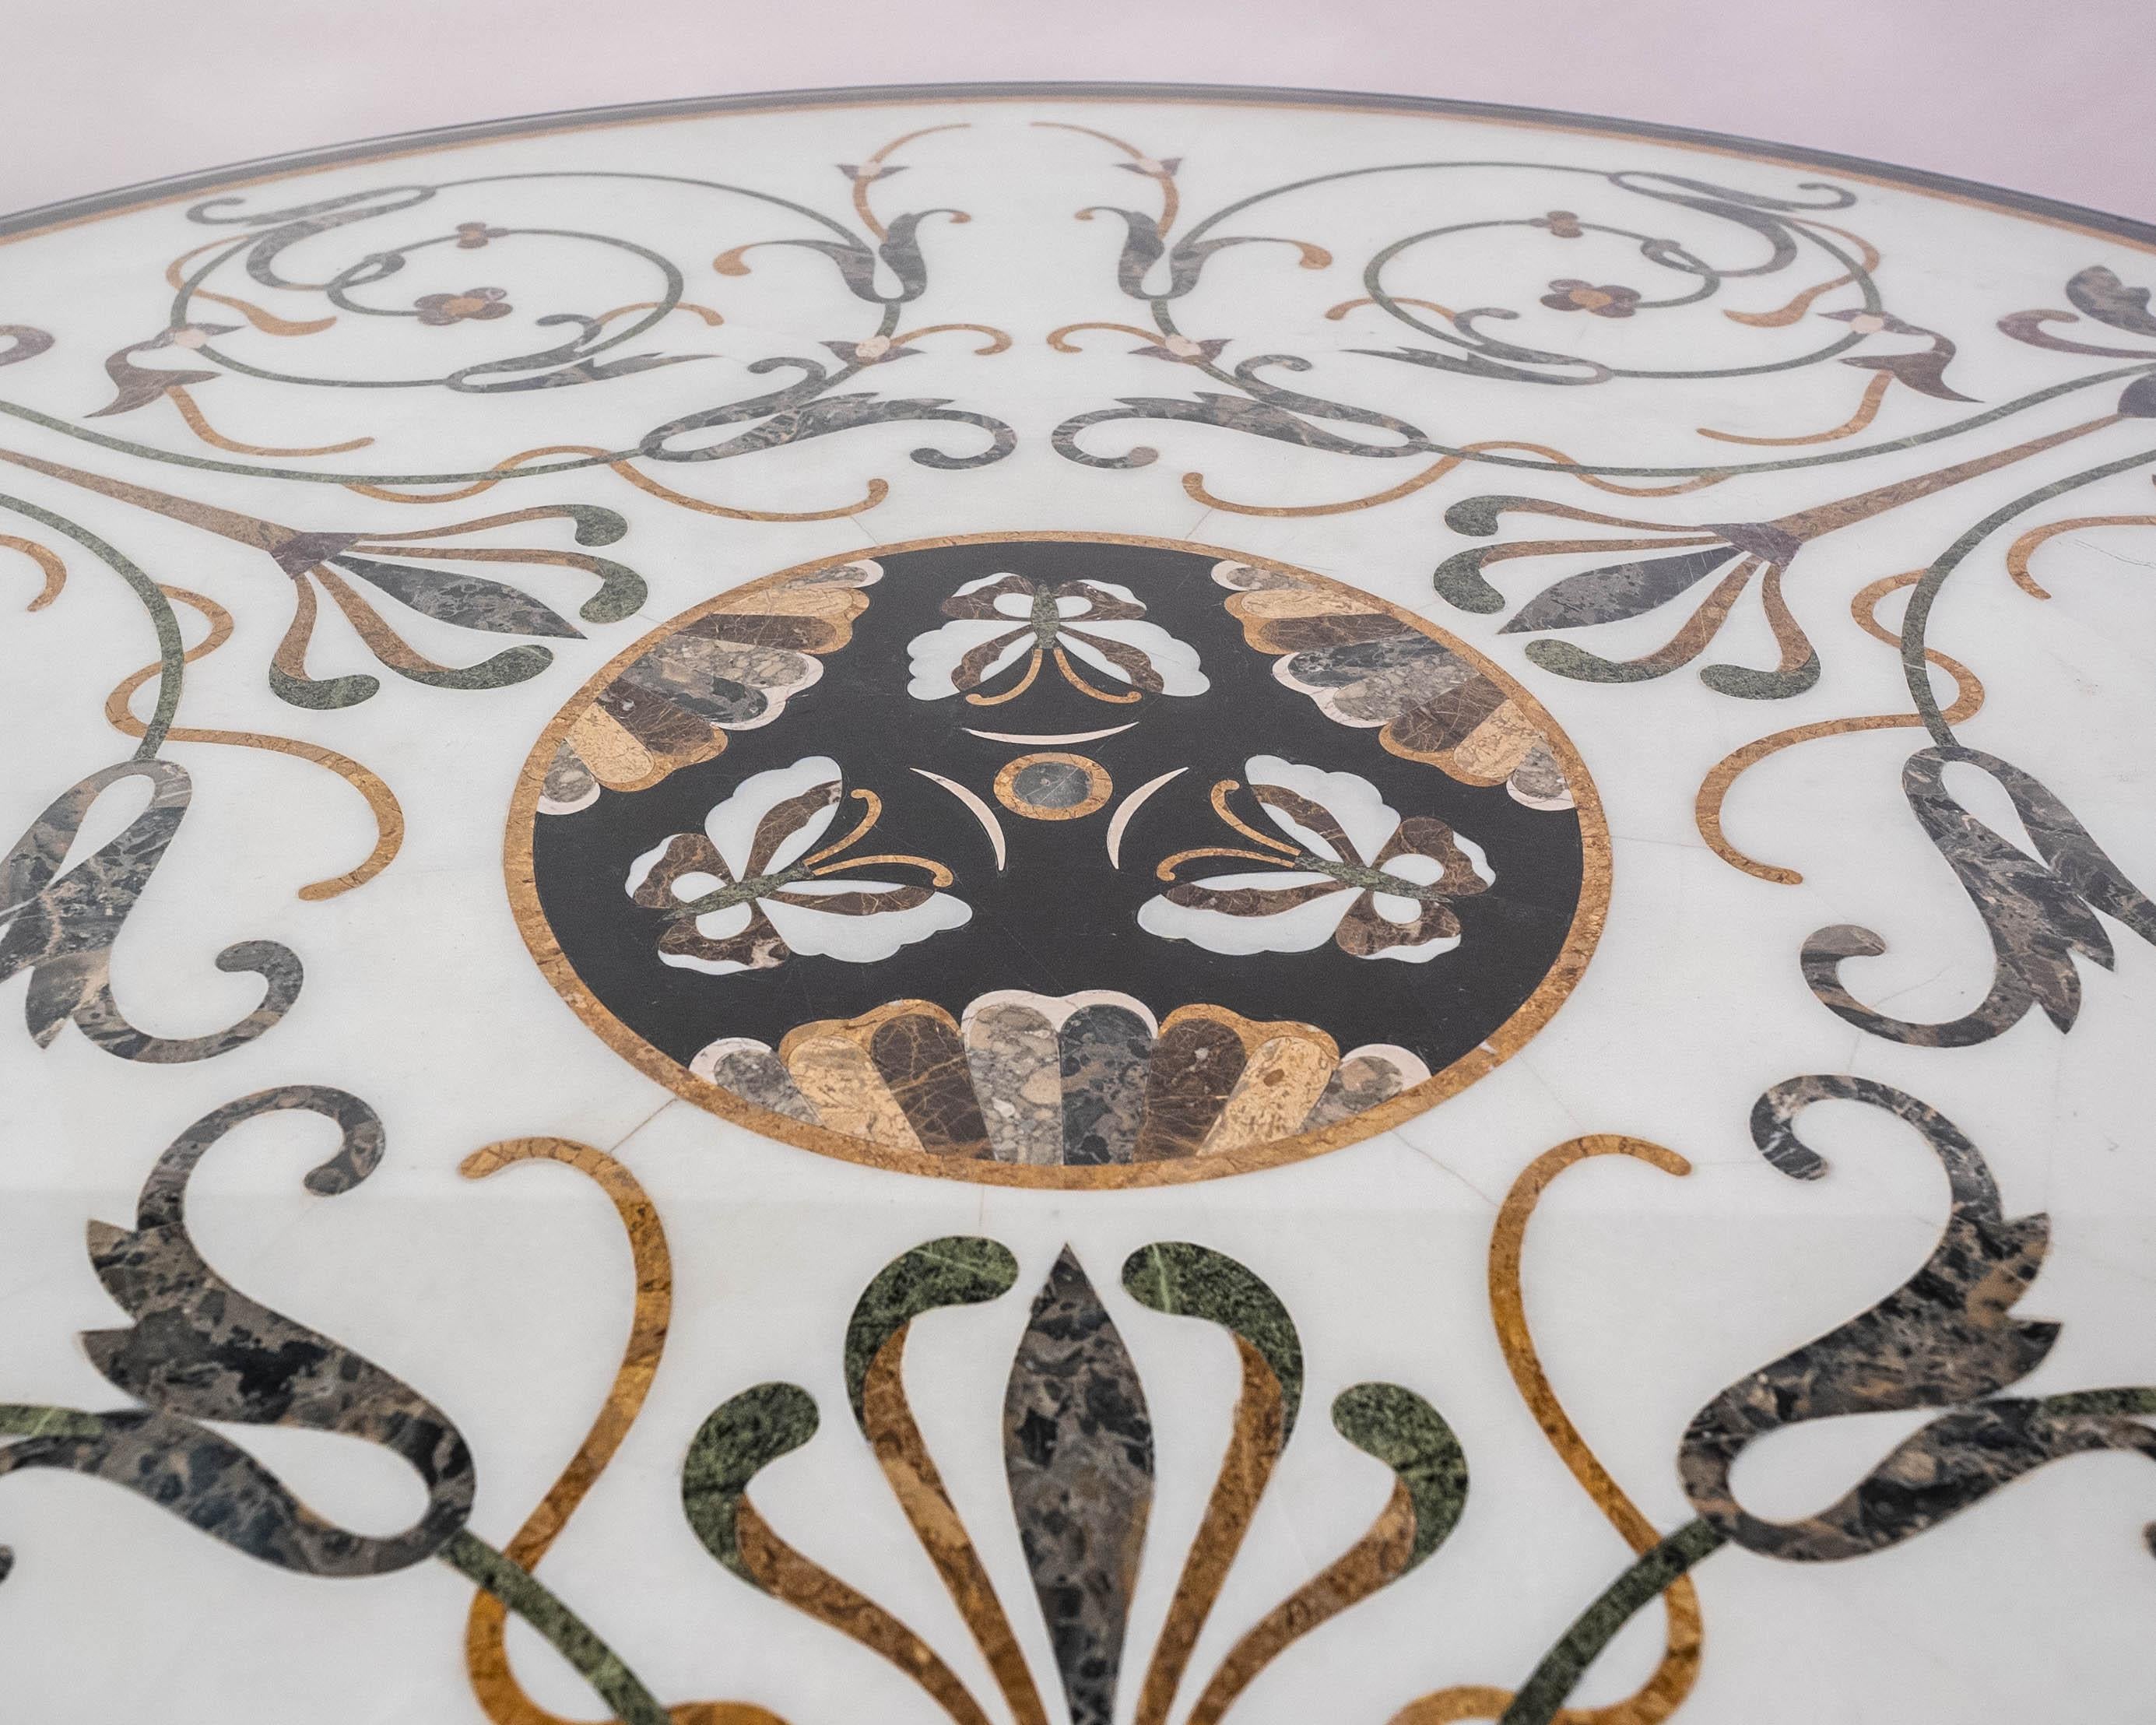 Show Stopper Hollywood Regency Round Pietra Dura Center Table For Sale 5